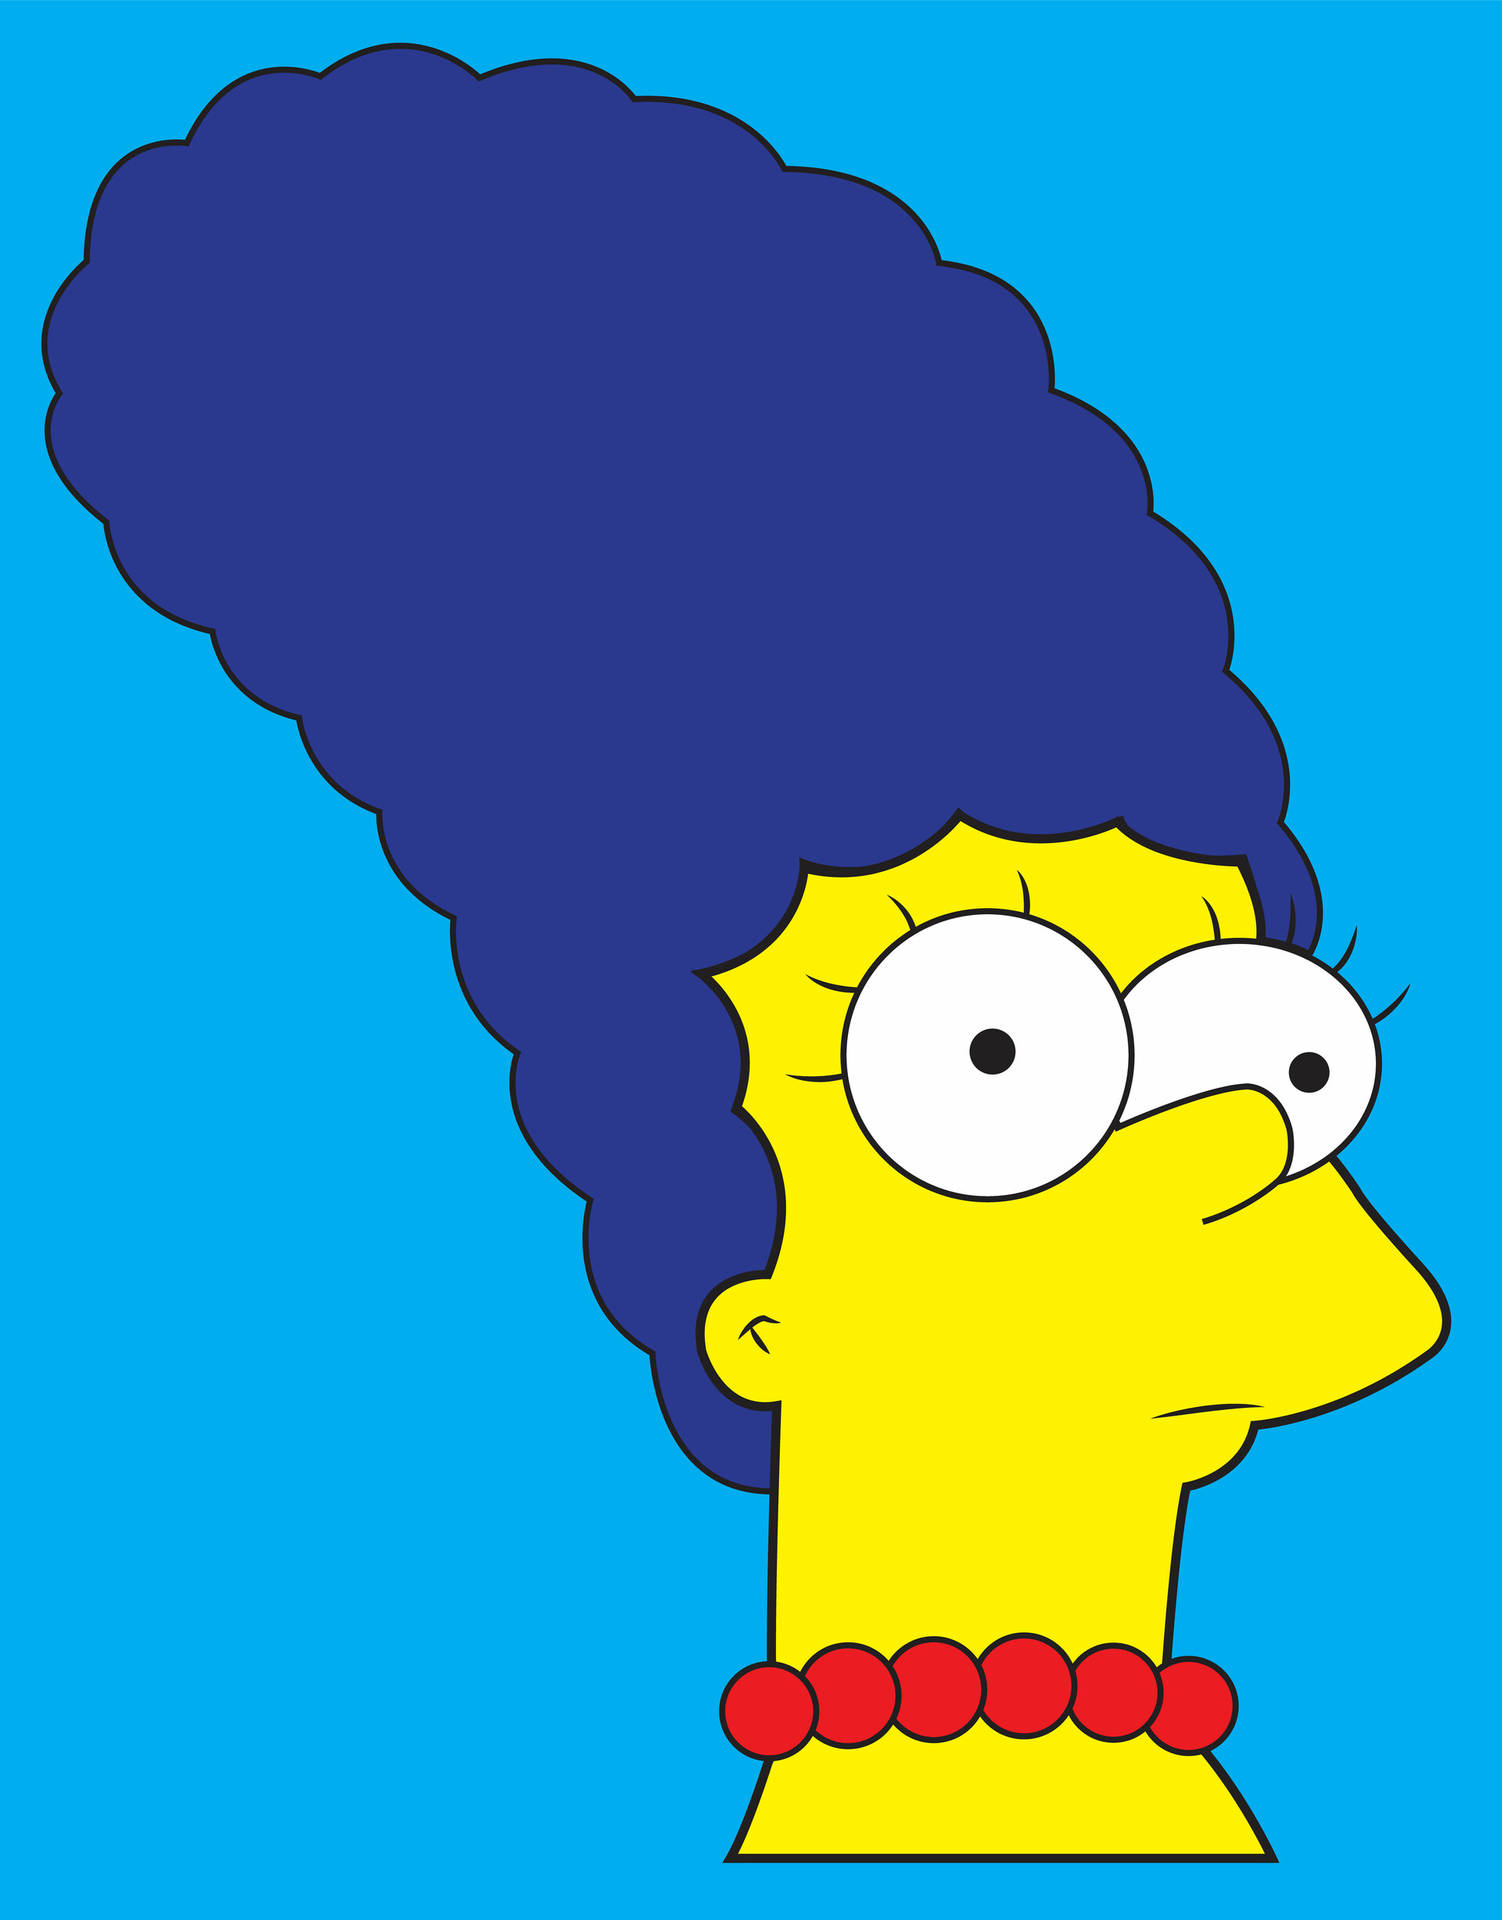 Marge Simpson From The Simpsons Wallpaper